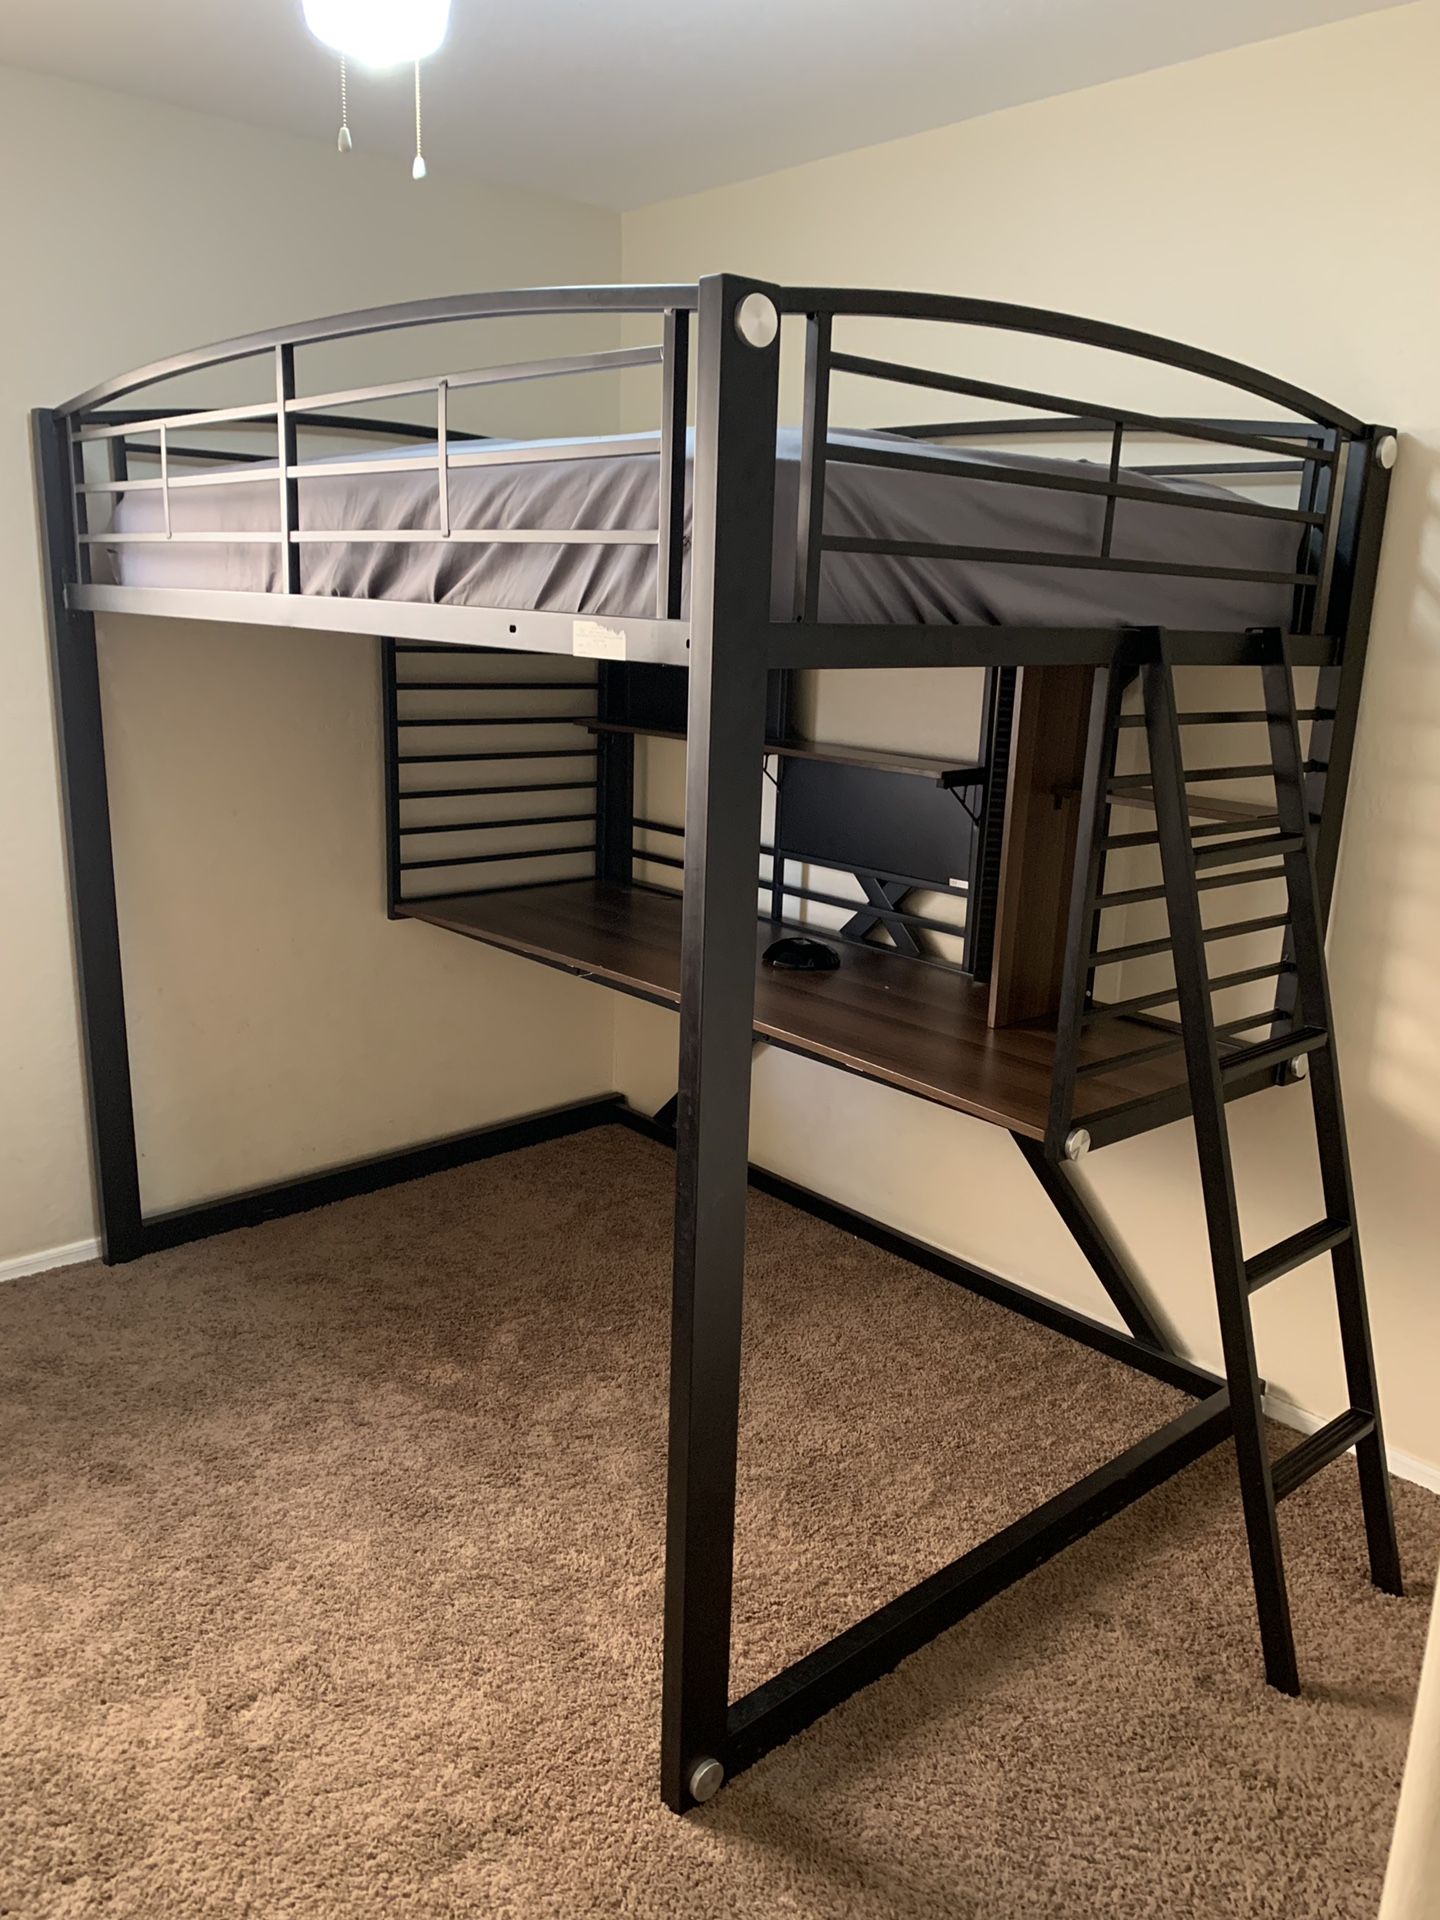 Bunk bed Full size must go